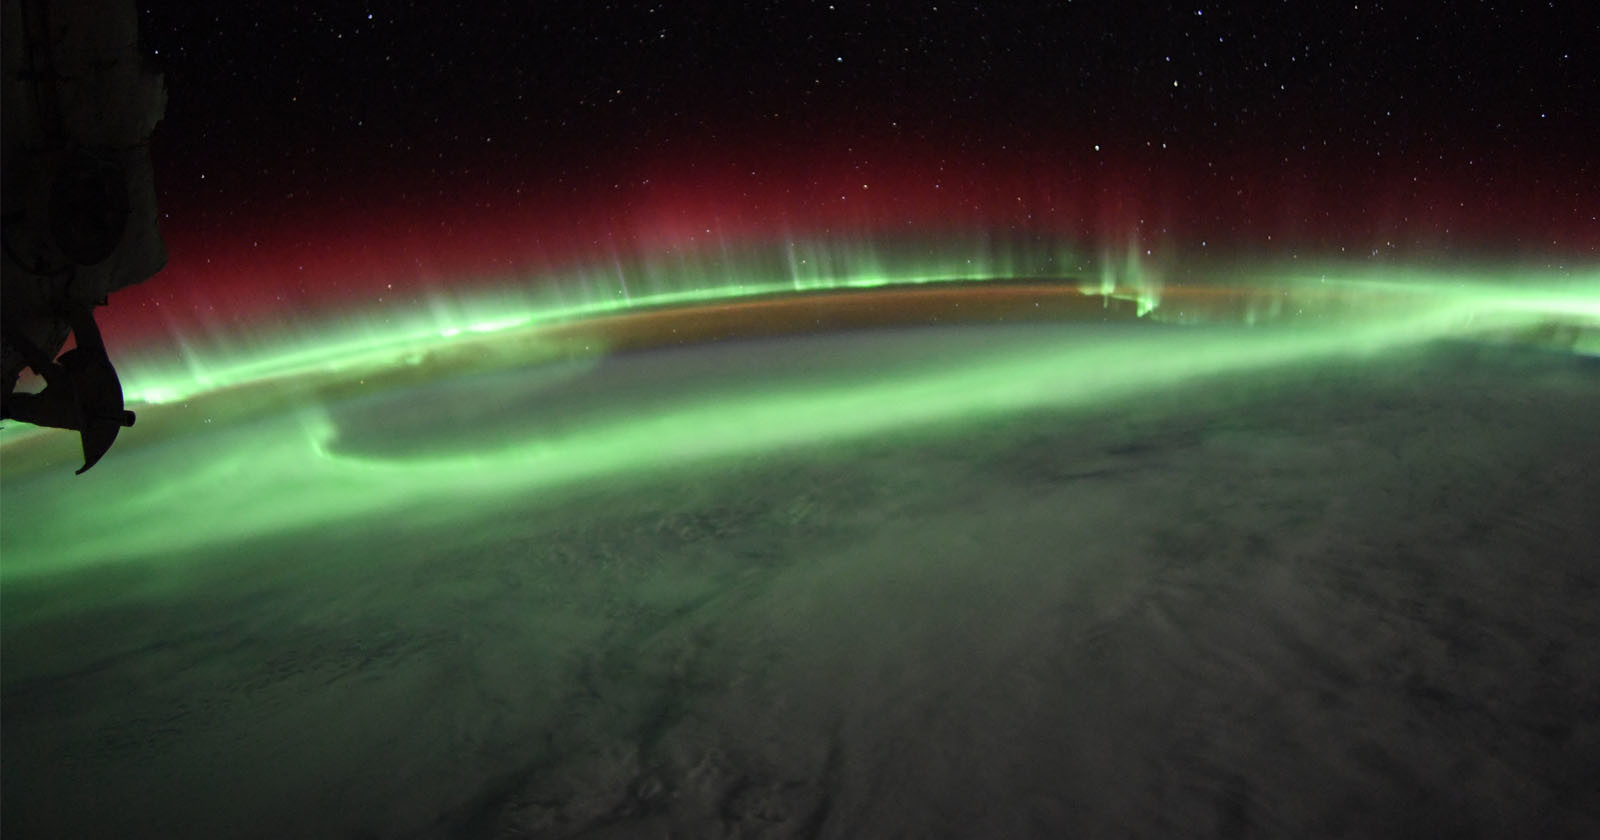 Astronaut Captures Magnificent Aurora Storm From Aboard the ISS